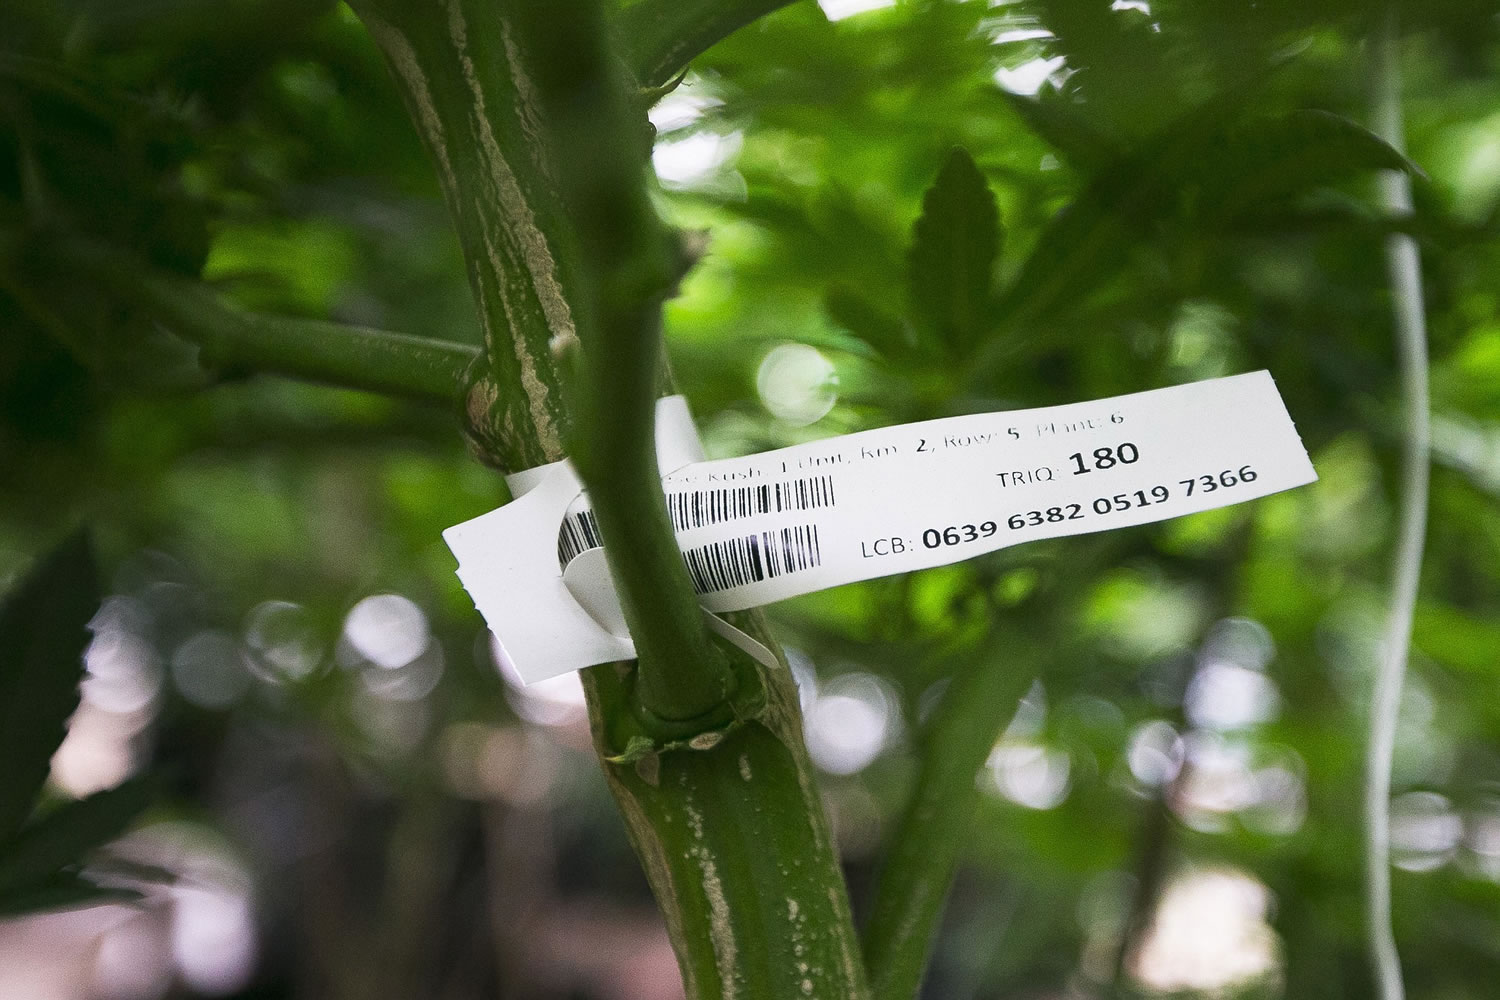 A barcode is seen at the base of the marijuana plant at Life Gardens near Ellensburg.